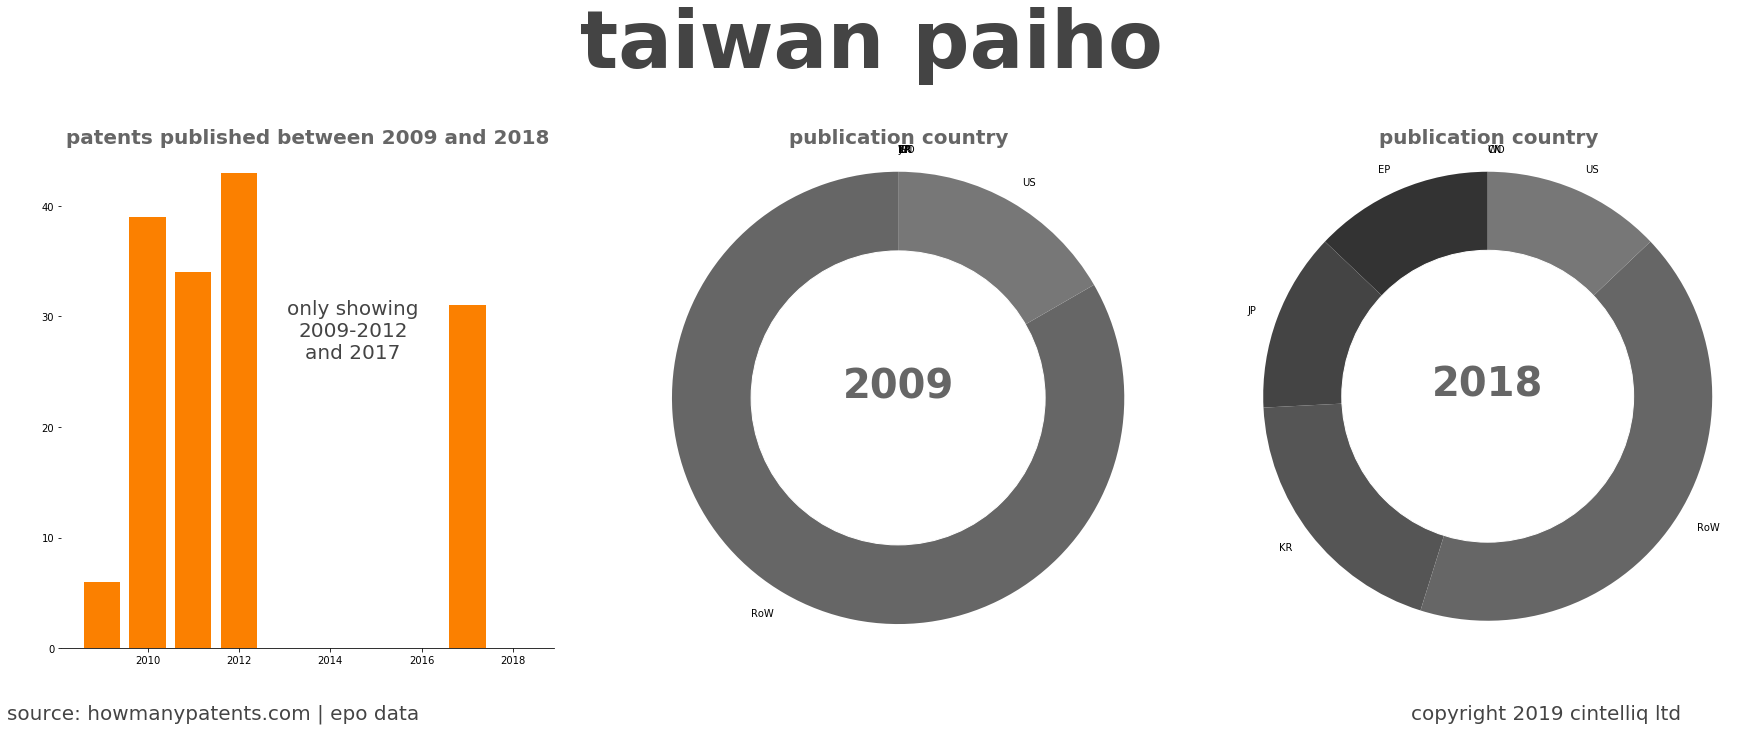 summary of patents for Taiwan Paiho